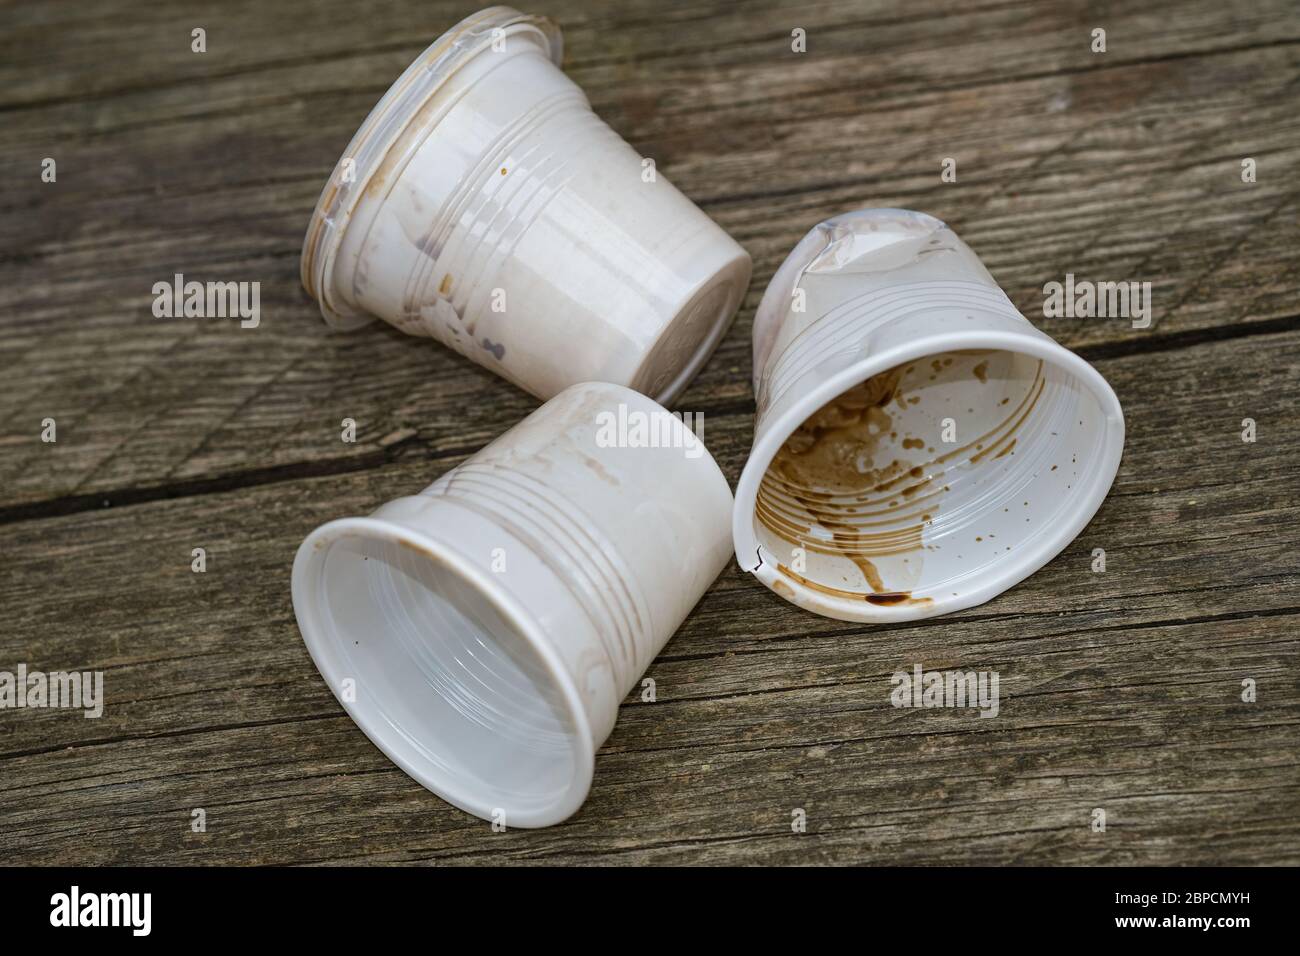 Take away plastic coffee used cups discharged waste,dirty disposable pollution Stock Photo